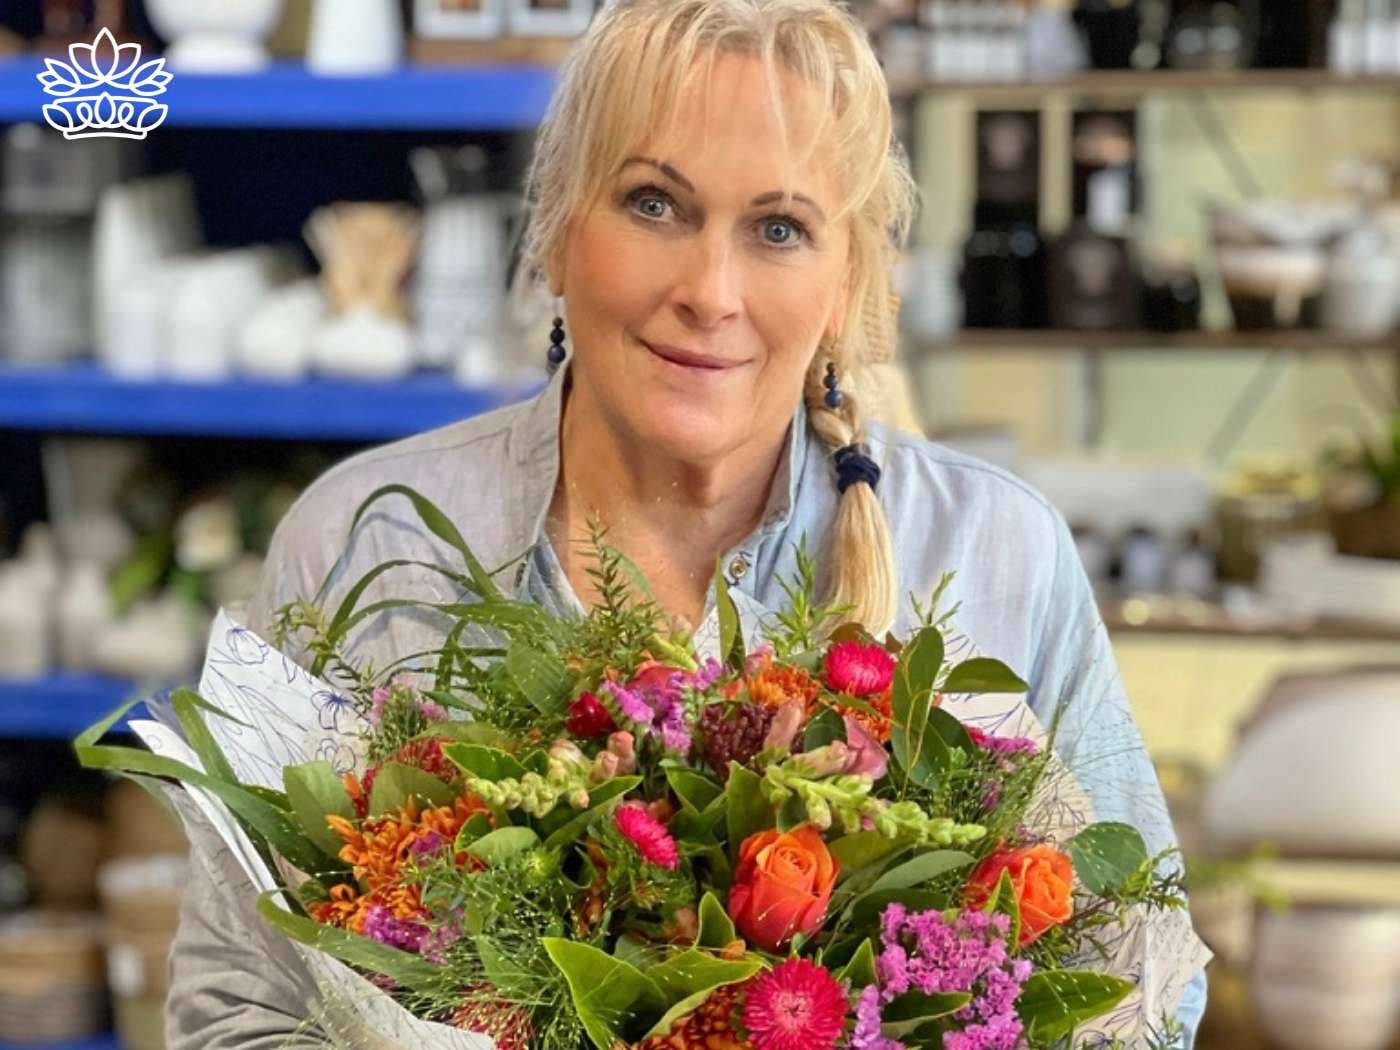 A cheerful woman with a bouquet of vivid, freshly arranged flowers, showcasing the quality and beauty of the floral arrangements crafted by Fabulous Flowers and Gifts.